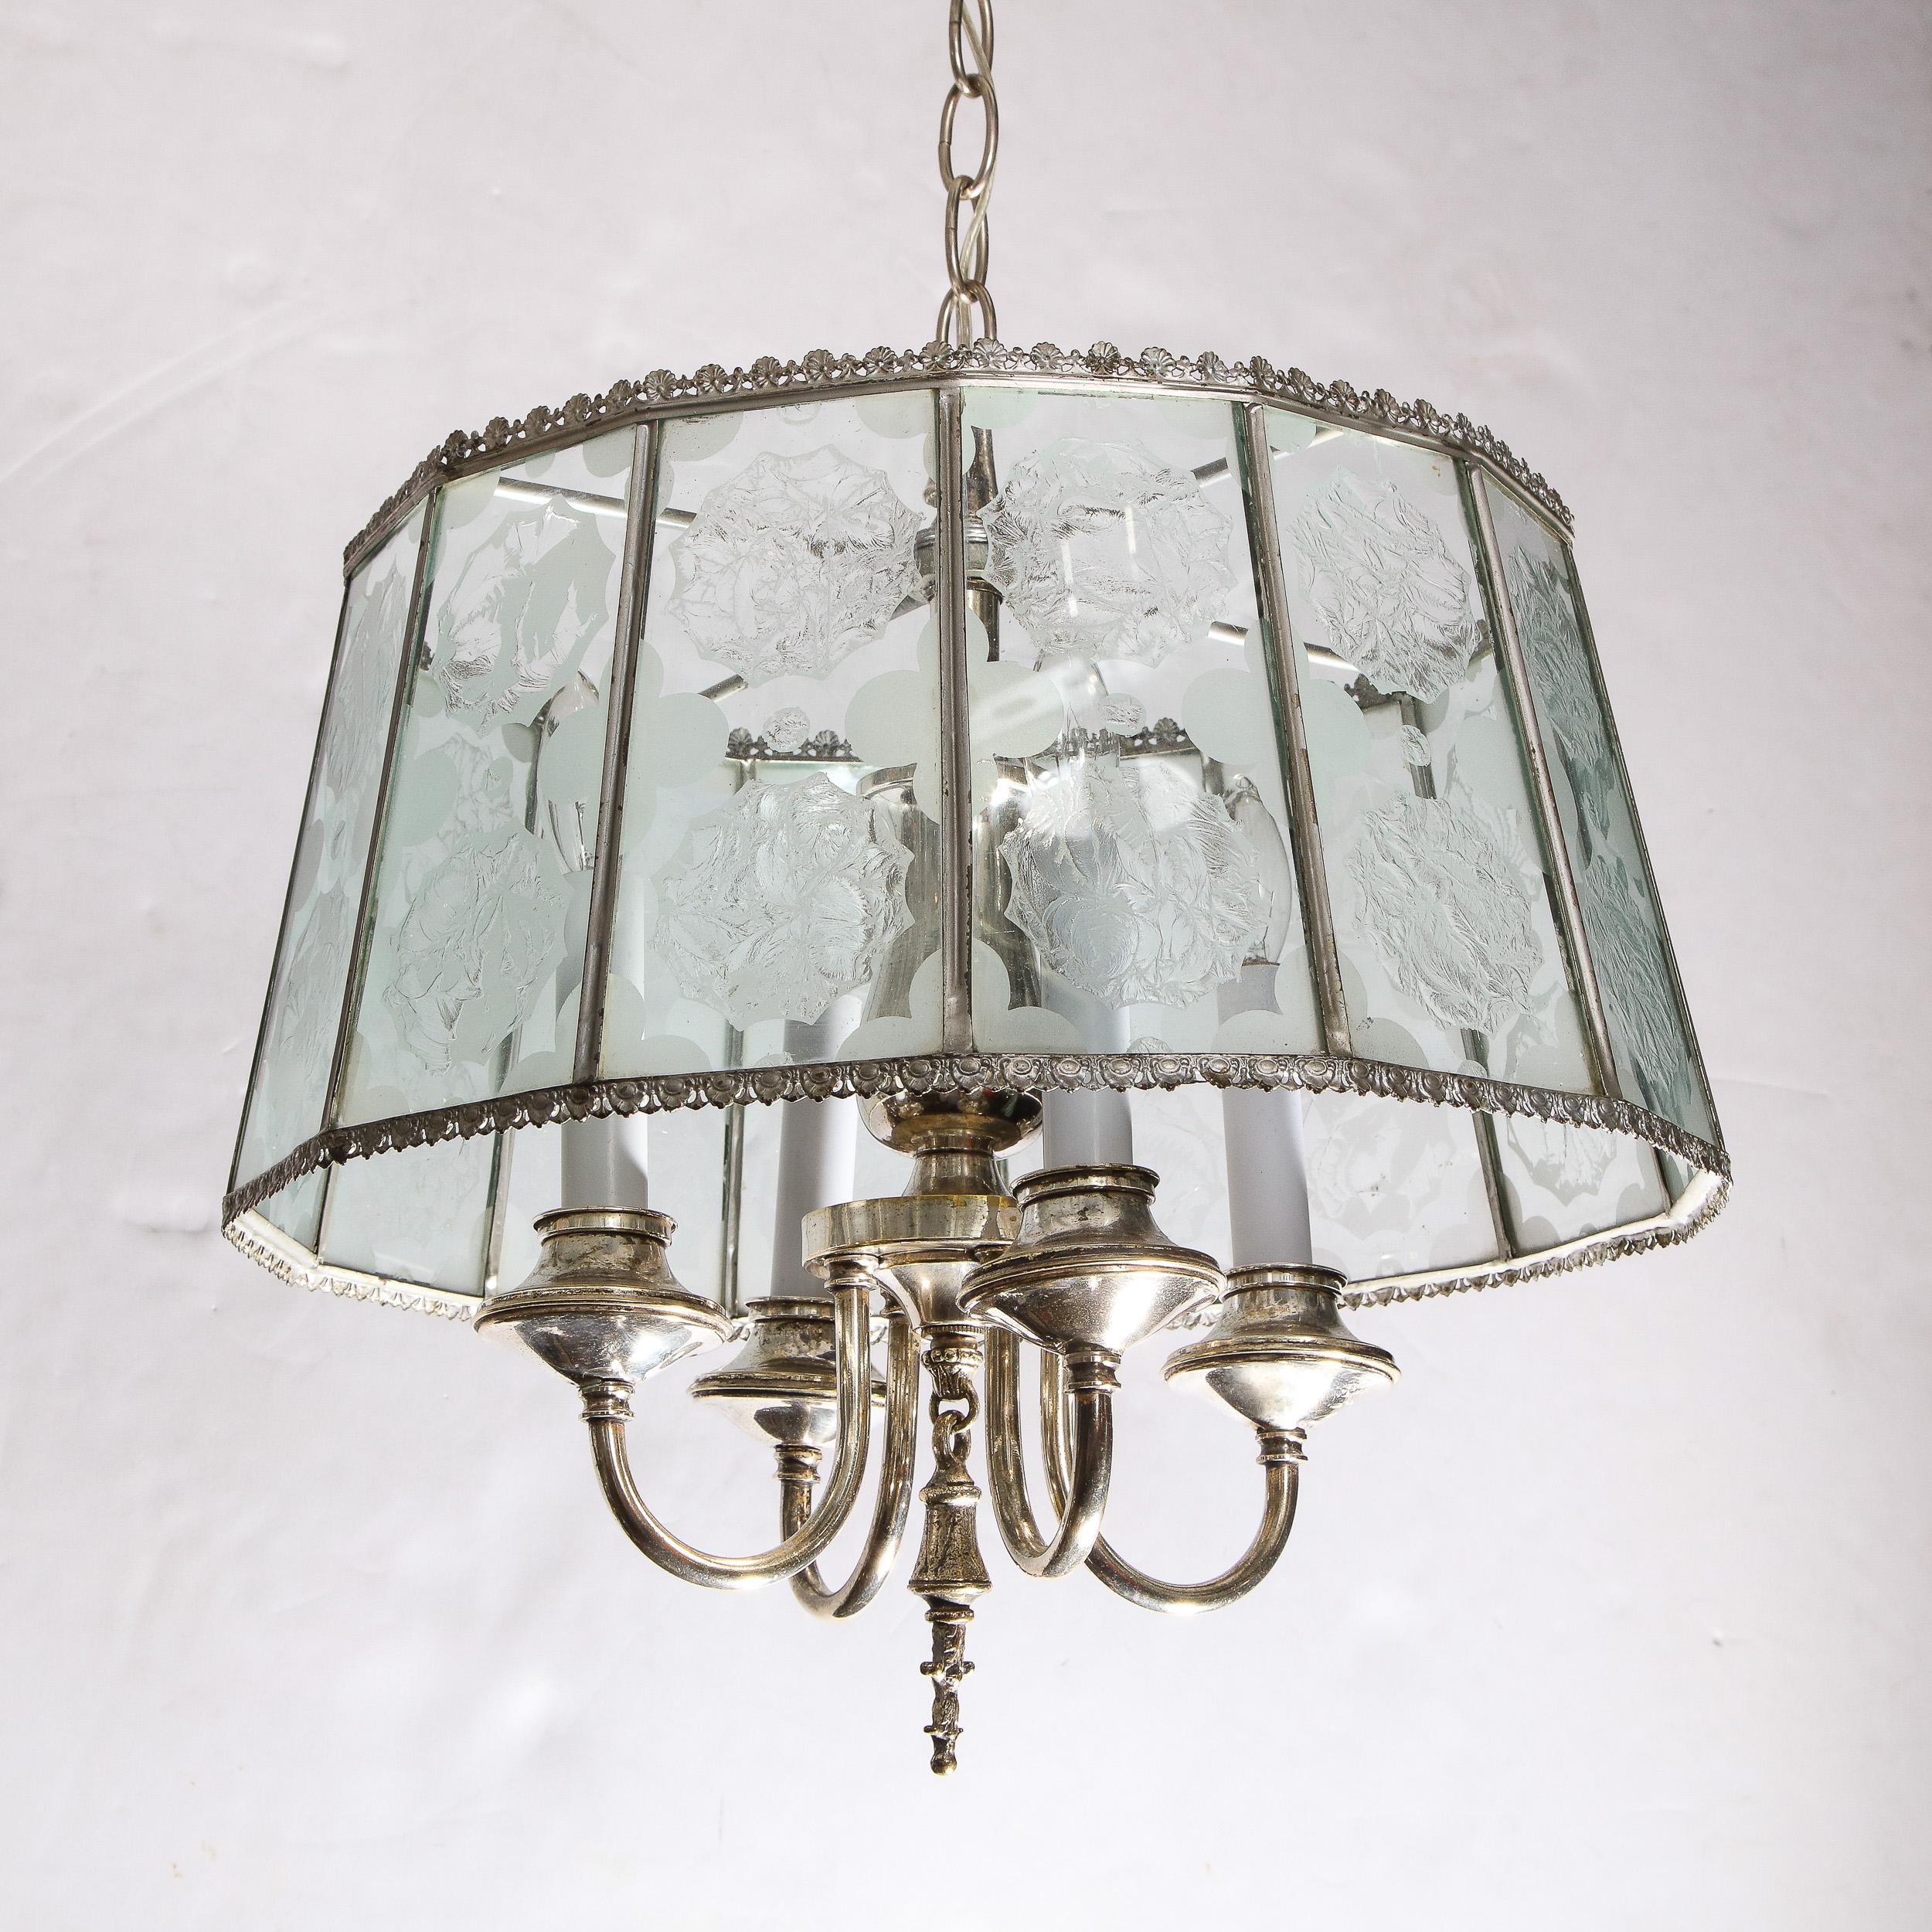 Art Deco Revival Lantern Translucent Glass Pendant with Silvered Fittings 1